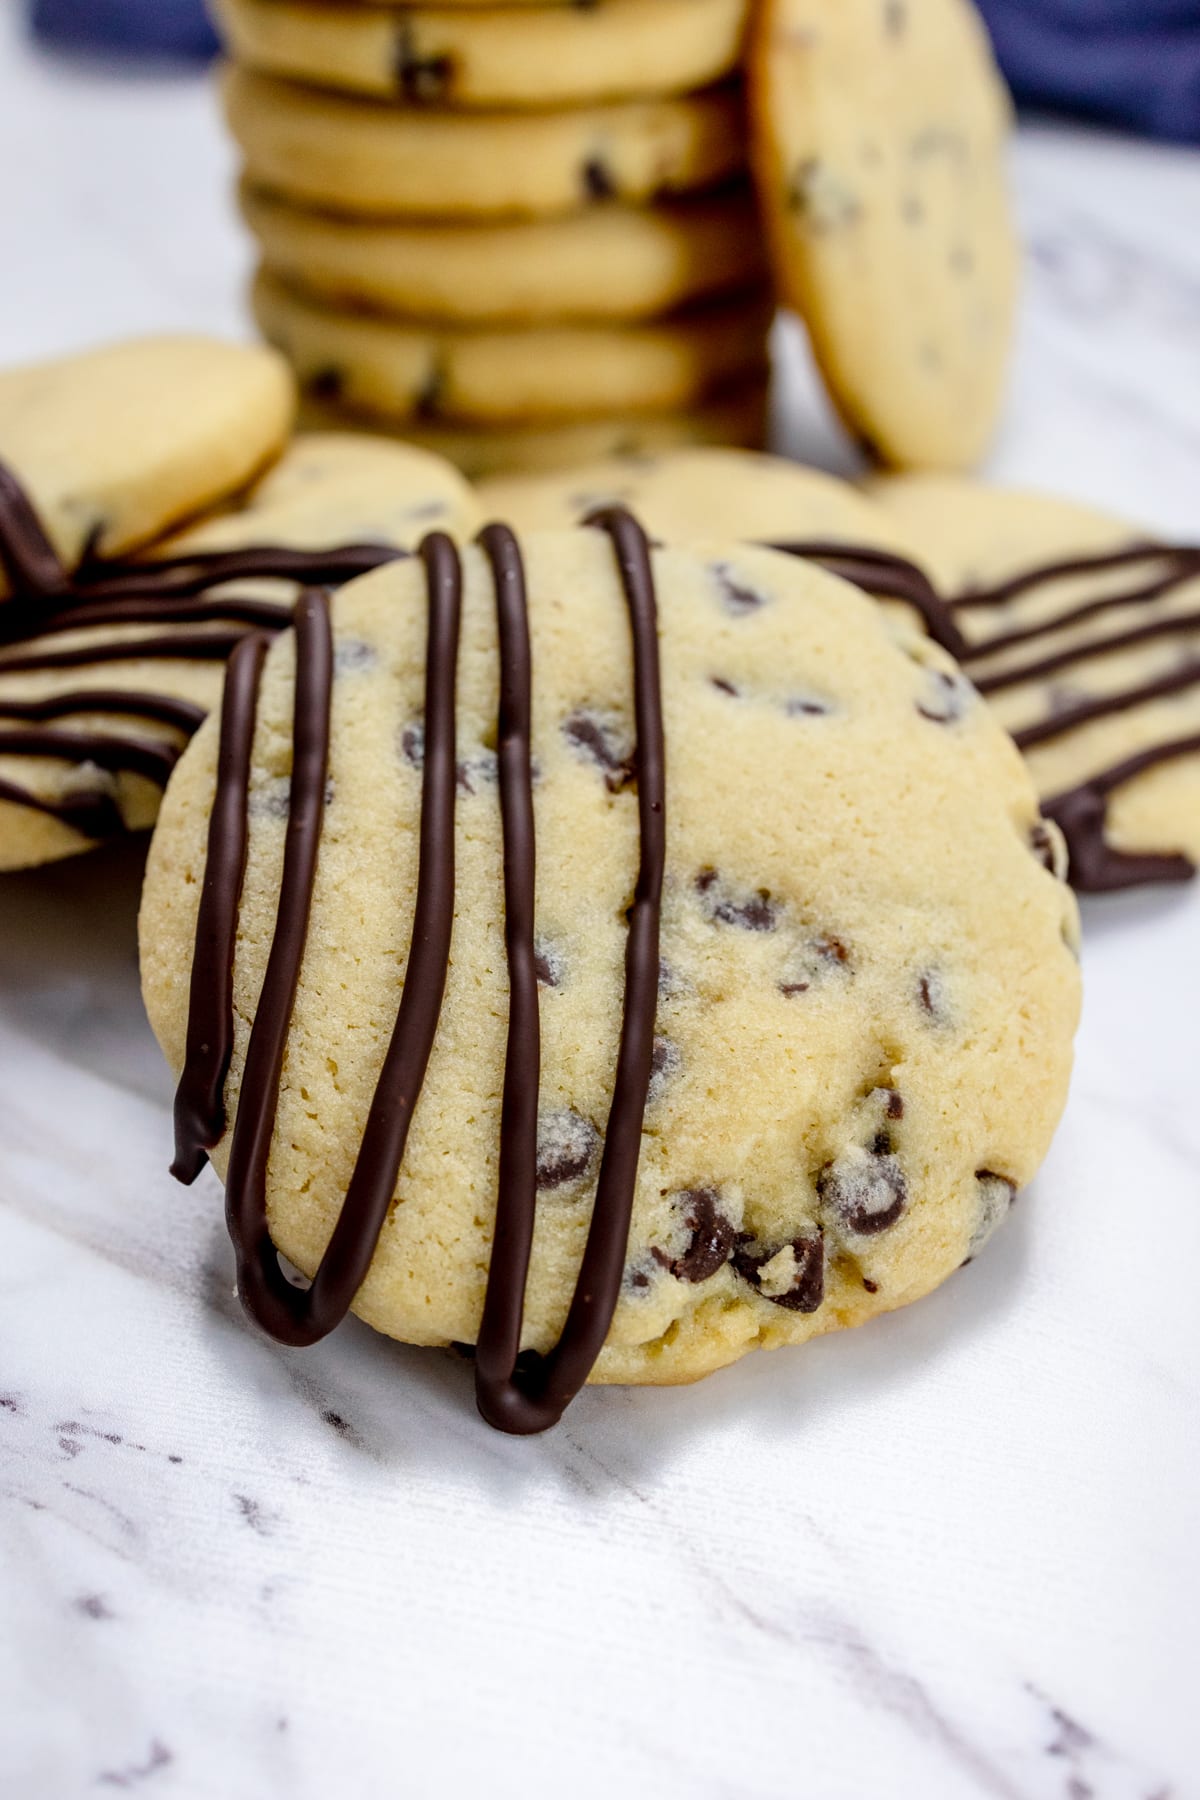 Close up of a chocolate chip cookie with melted chocolate on it in front of a stack of chocolate chip cookies.